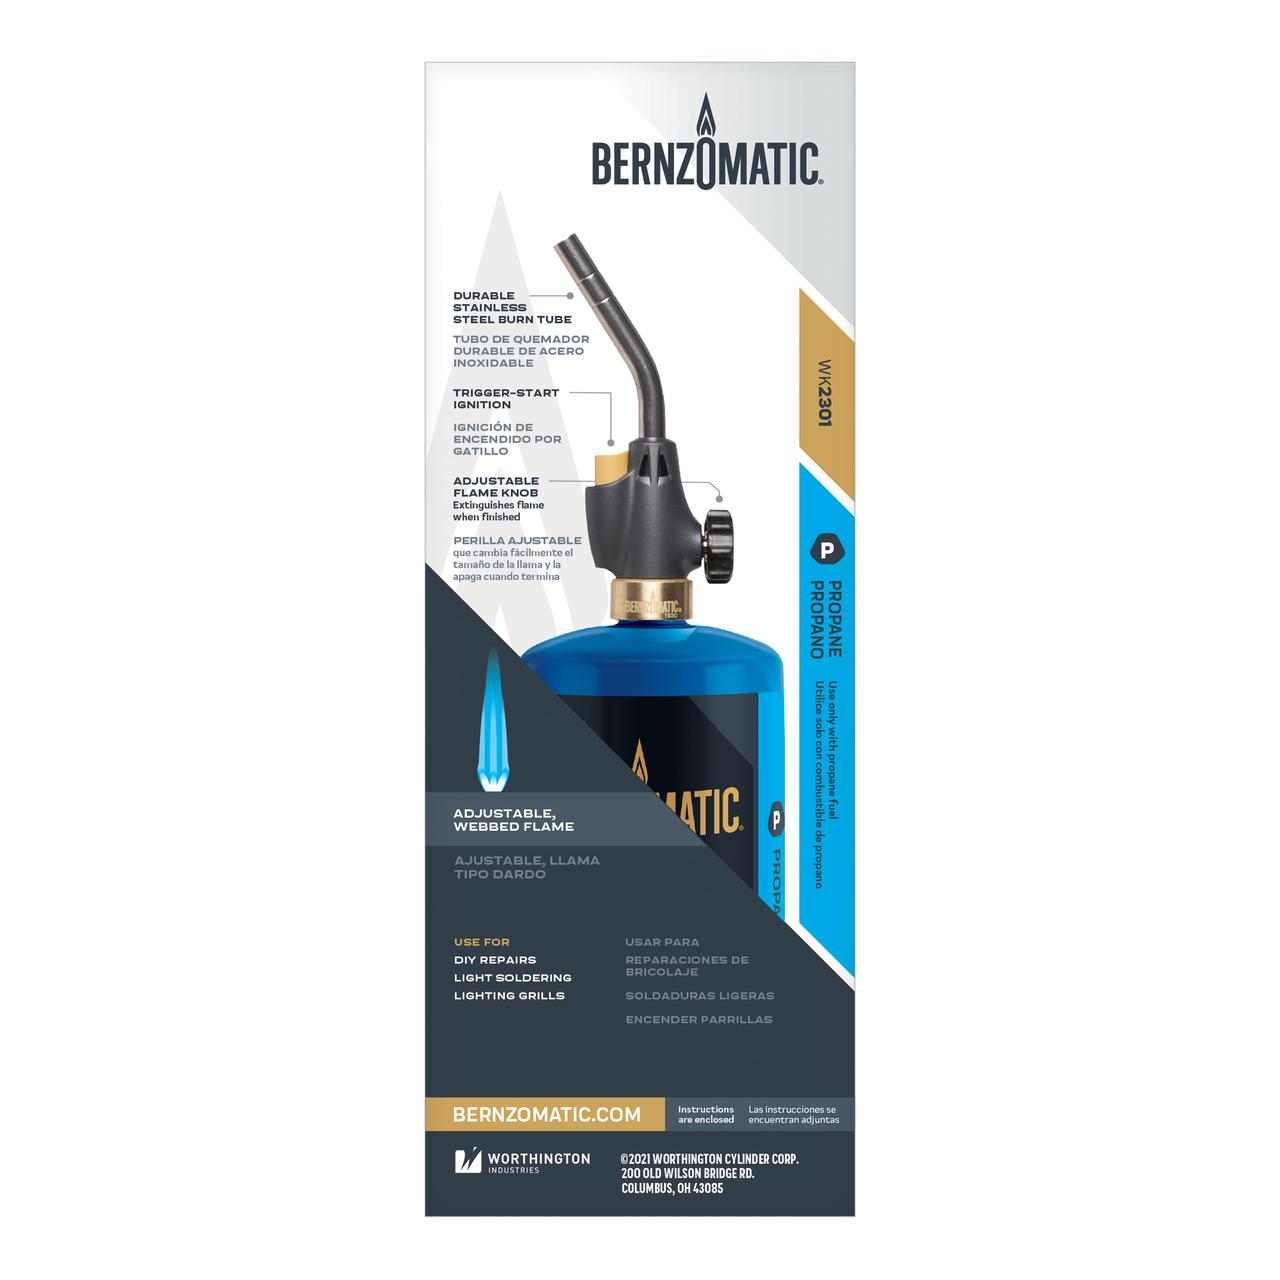 Bernzomatic, Basic Torch Kit, With Built In Ignition - image 5 of 9